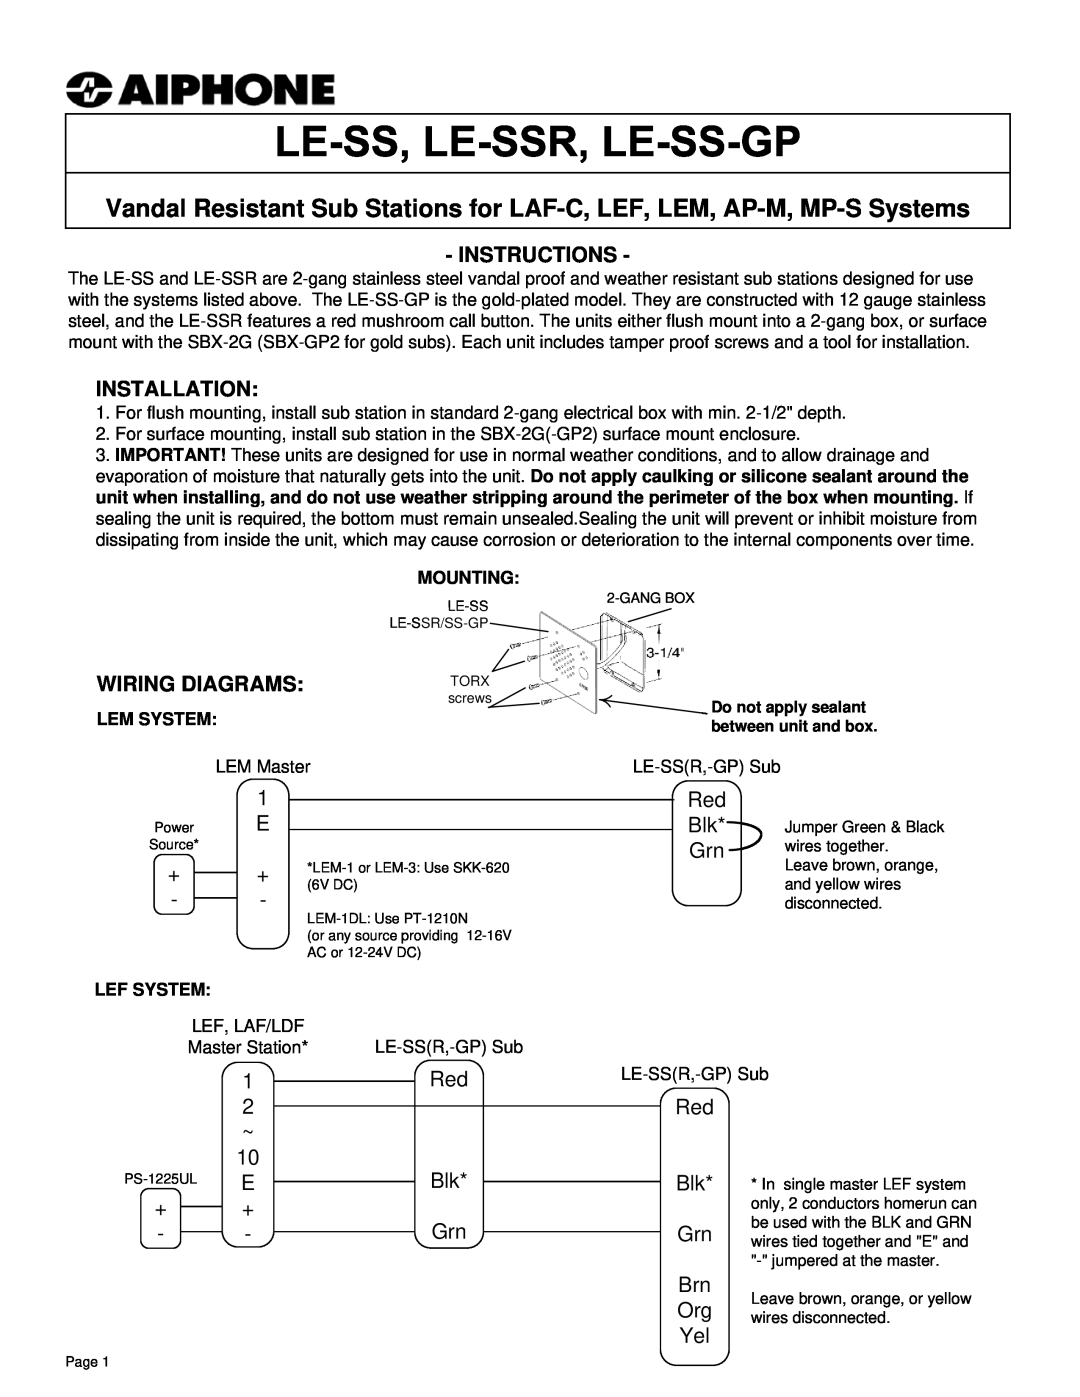 Aiphone A, LE-SS/LE-SSR manual Instructions, Installation, Wiring Diagrams 